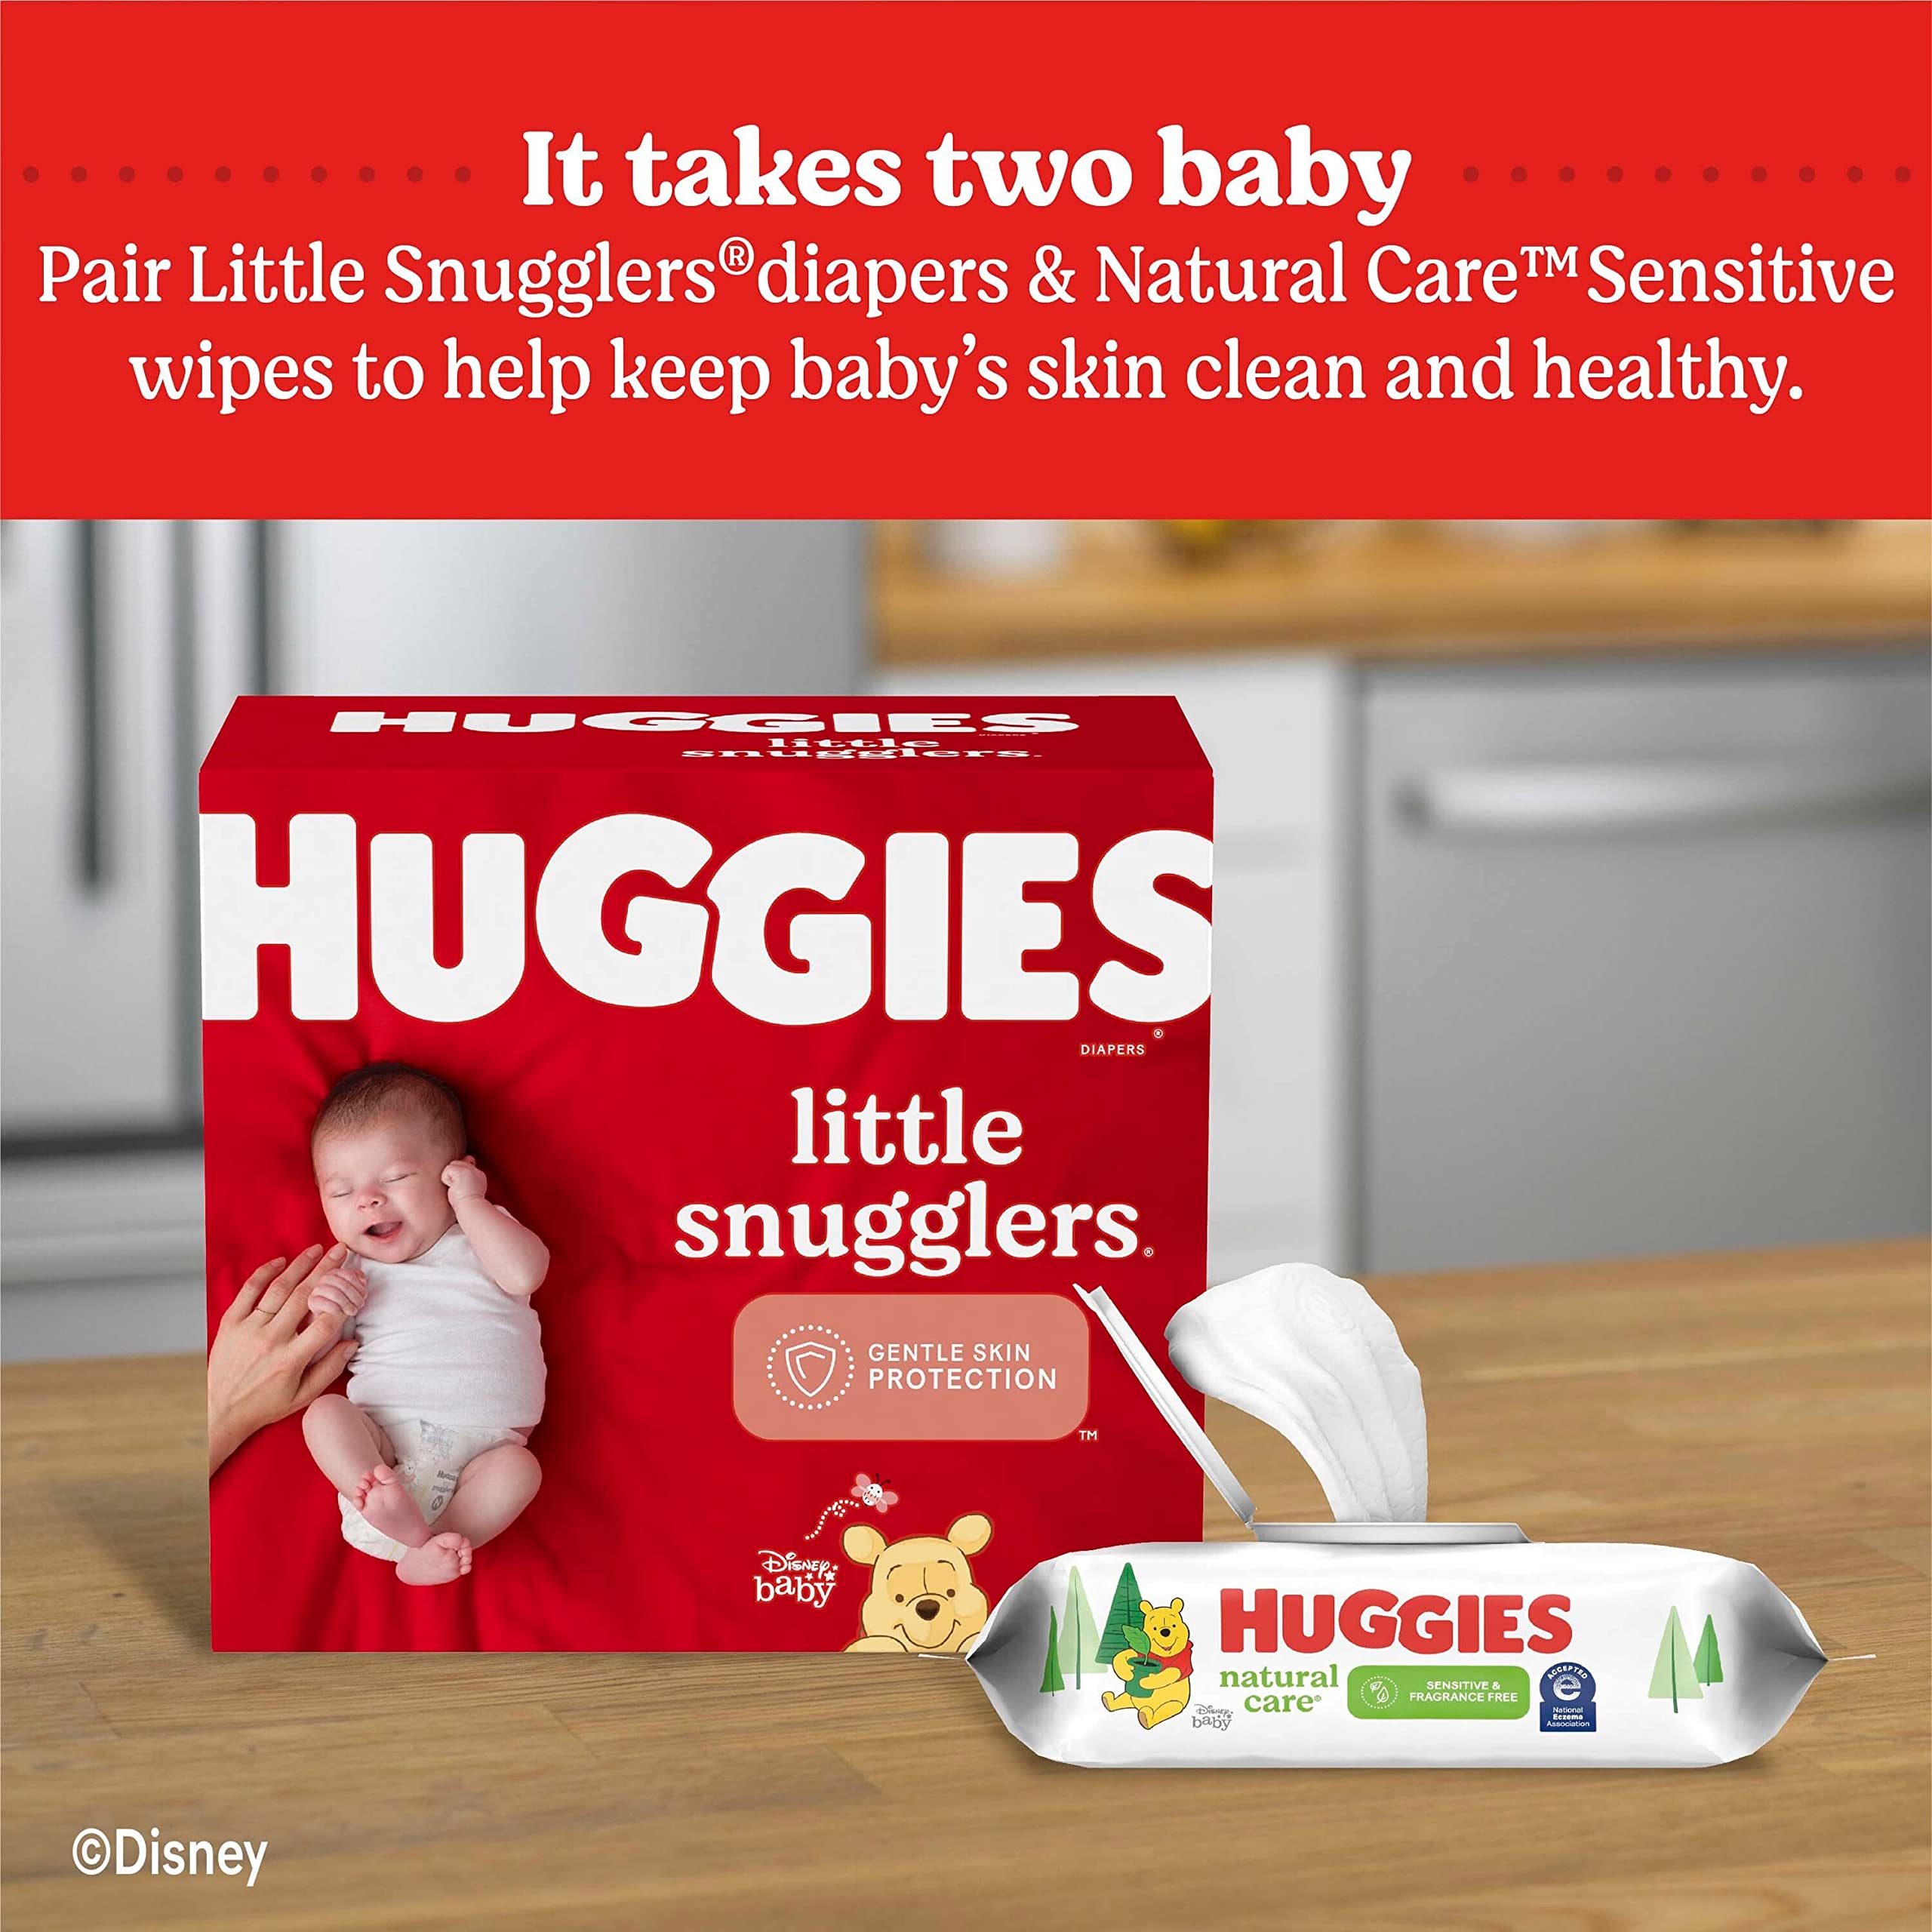 Huggies Natural Care Sensitive Baby Wipes, Unscented, Hypoallergenic, 99% Purified Water, 1 Flip-Top Pack (56 Wipes Total)